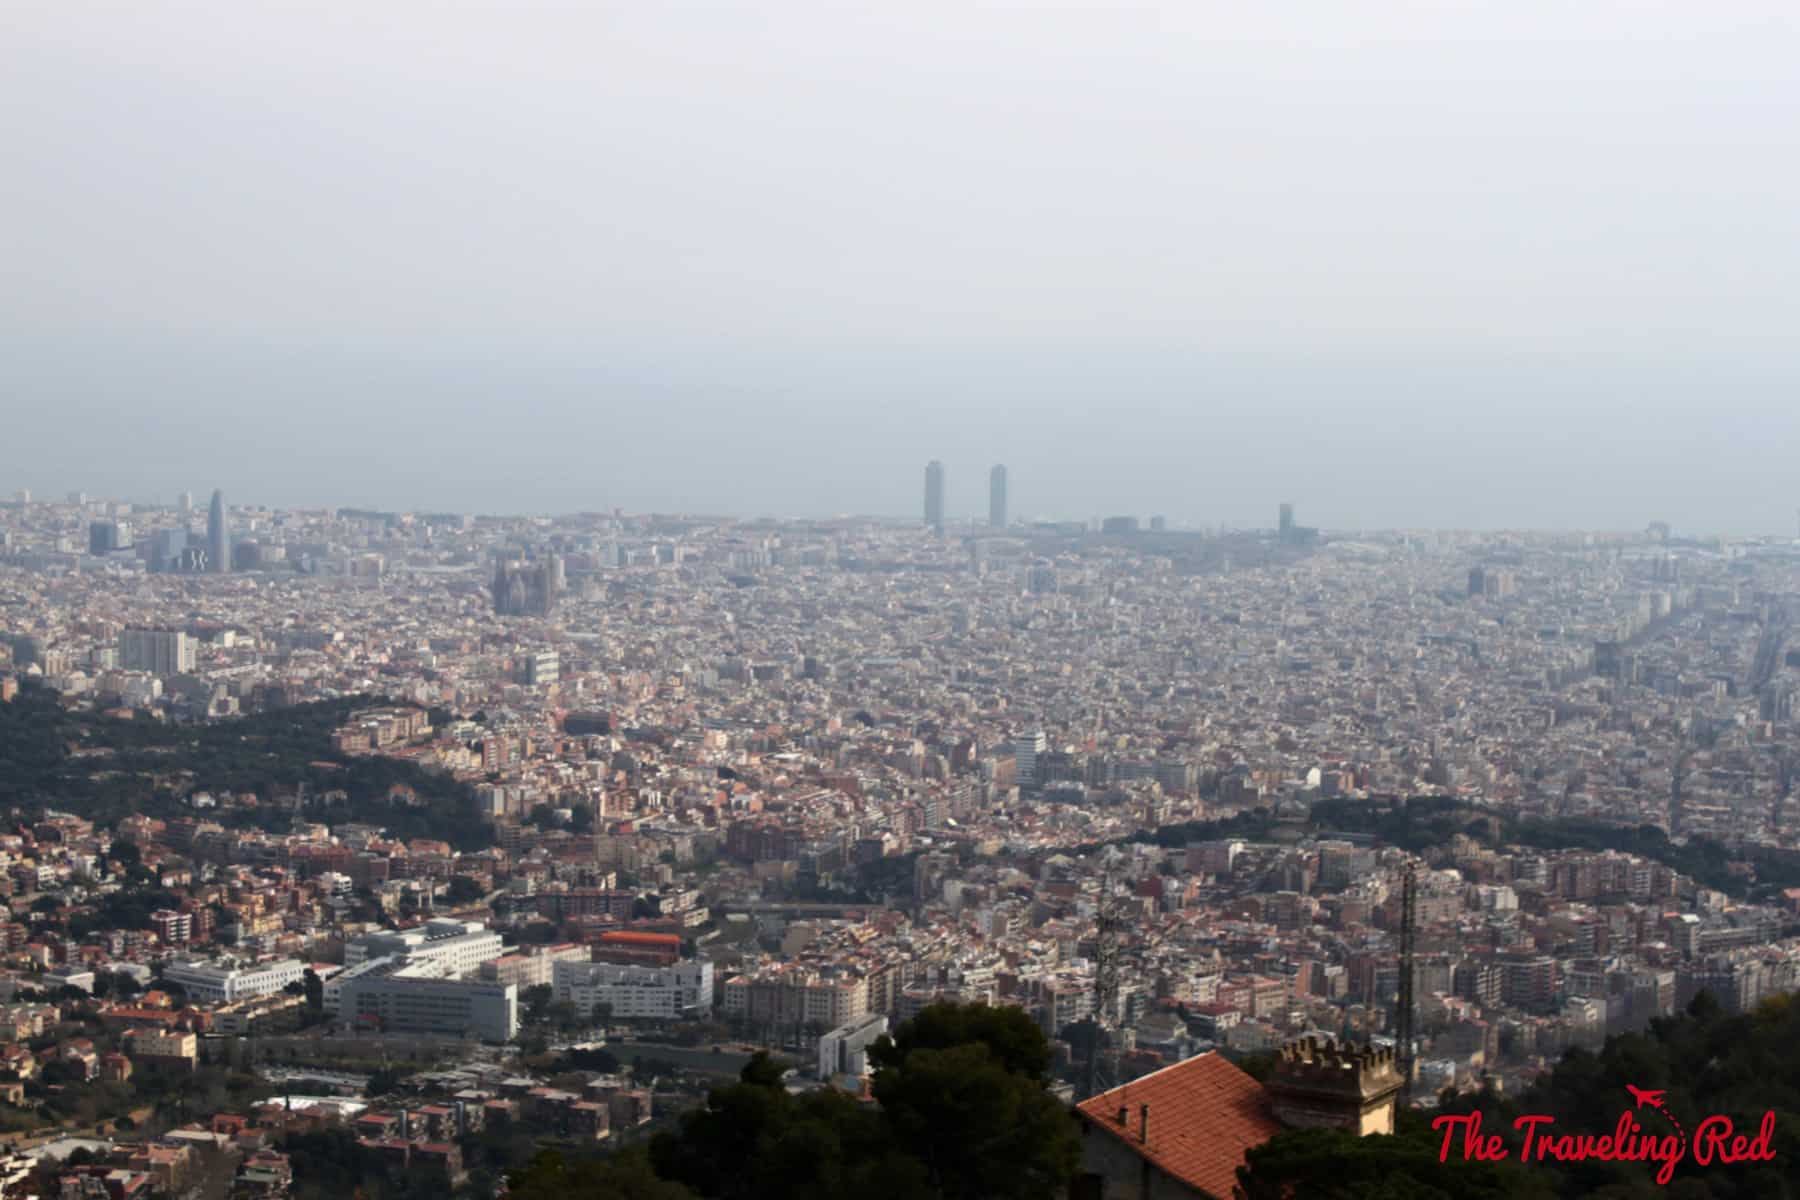 The view of the city from Tibidabo. Tibidabo is a mountain with an amusement park and church on the summit. It is the highest point in the city with incredible sweeping views of Barcelona, Spain.